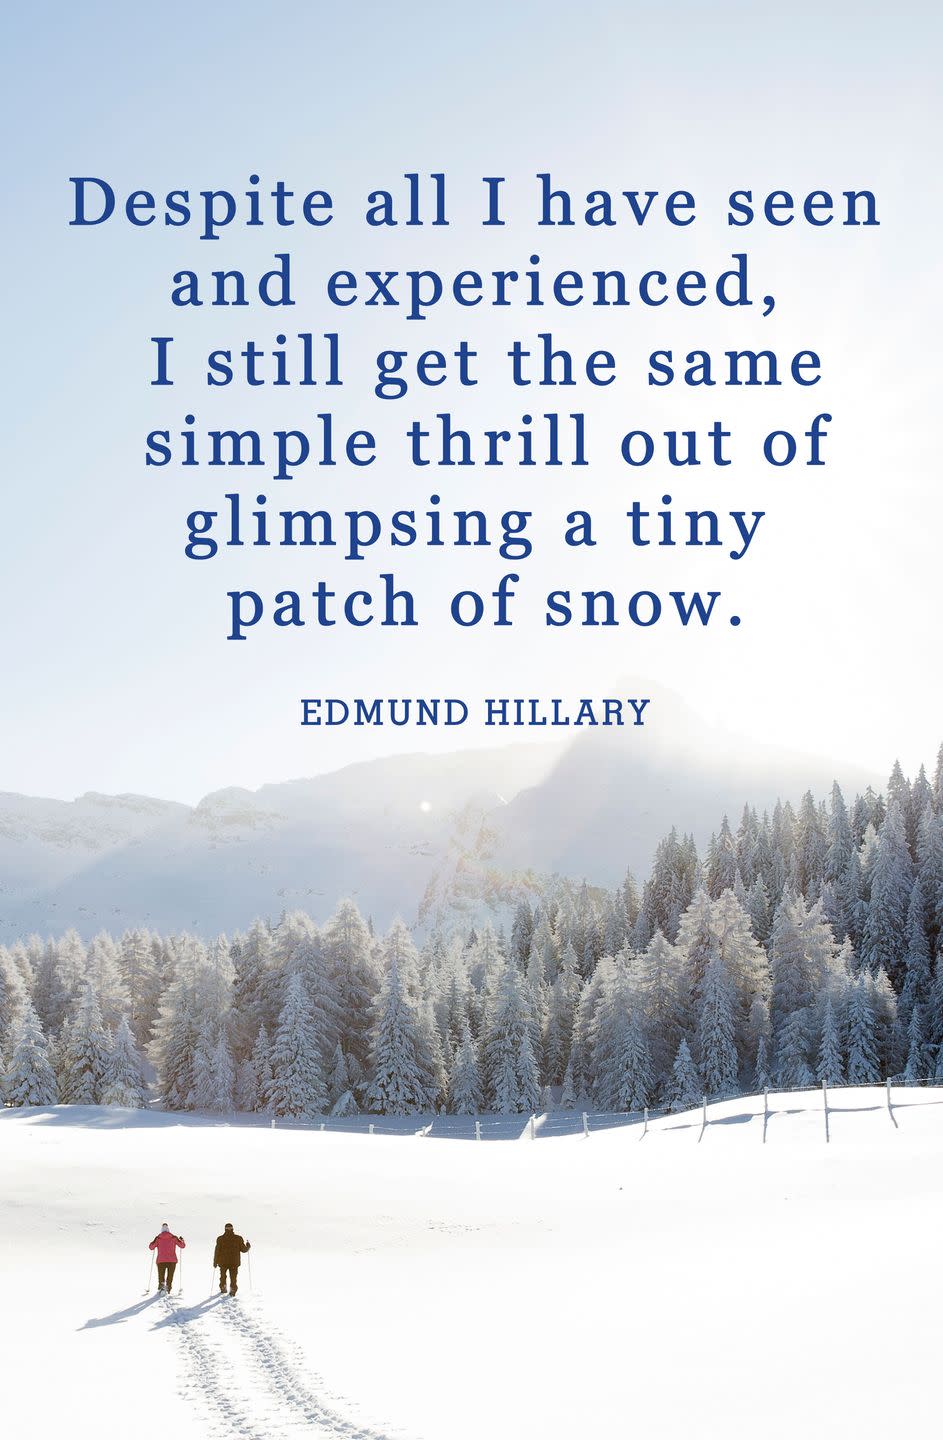 <p>"Despite all I have seen and experienced, I still get the same simple thrill out of glimpsing a tiny patch of snow."</p>